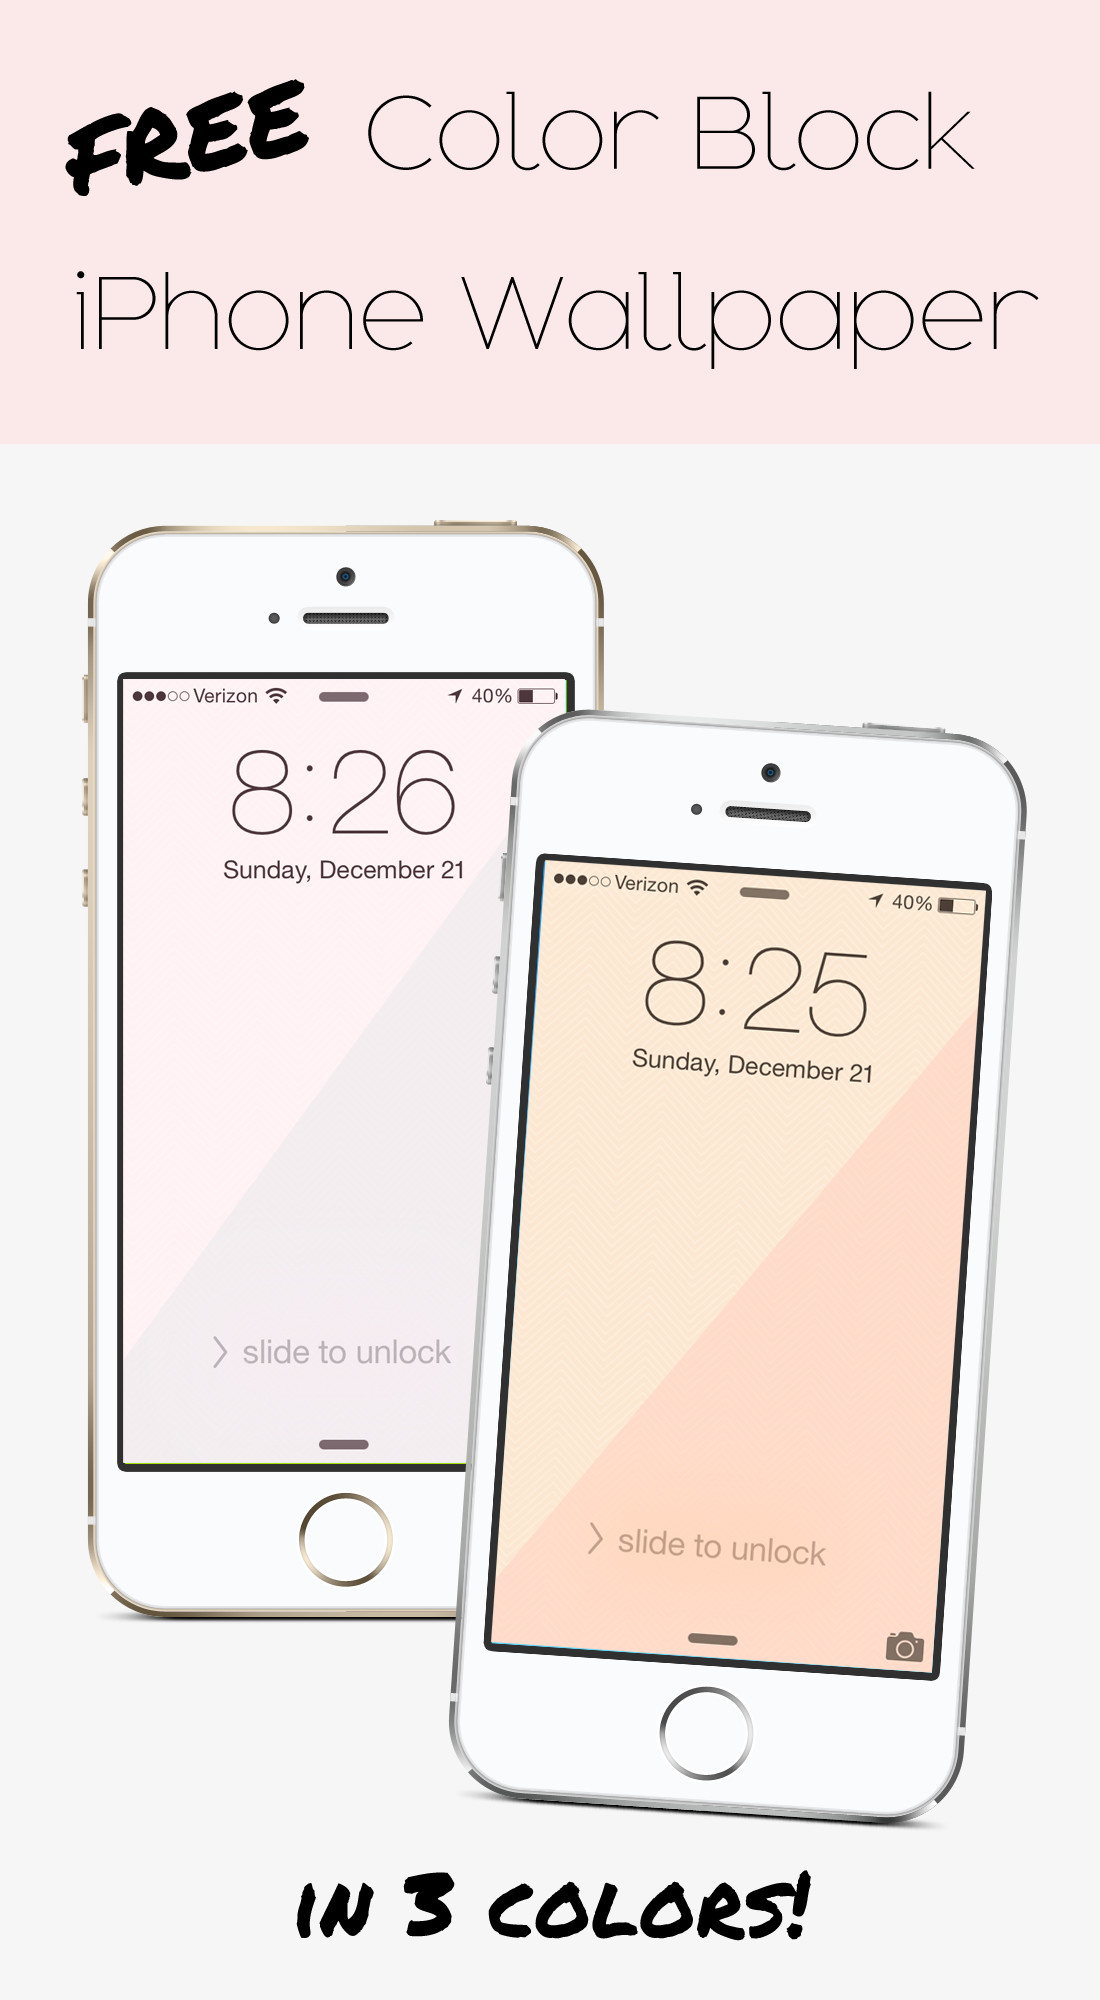 1100x2000 Free color block iPhone wallpapers in 3 different colors